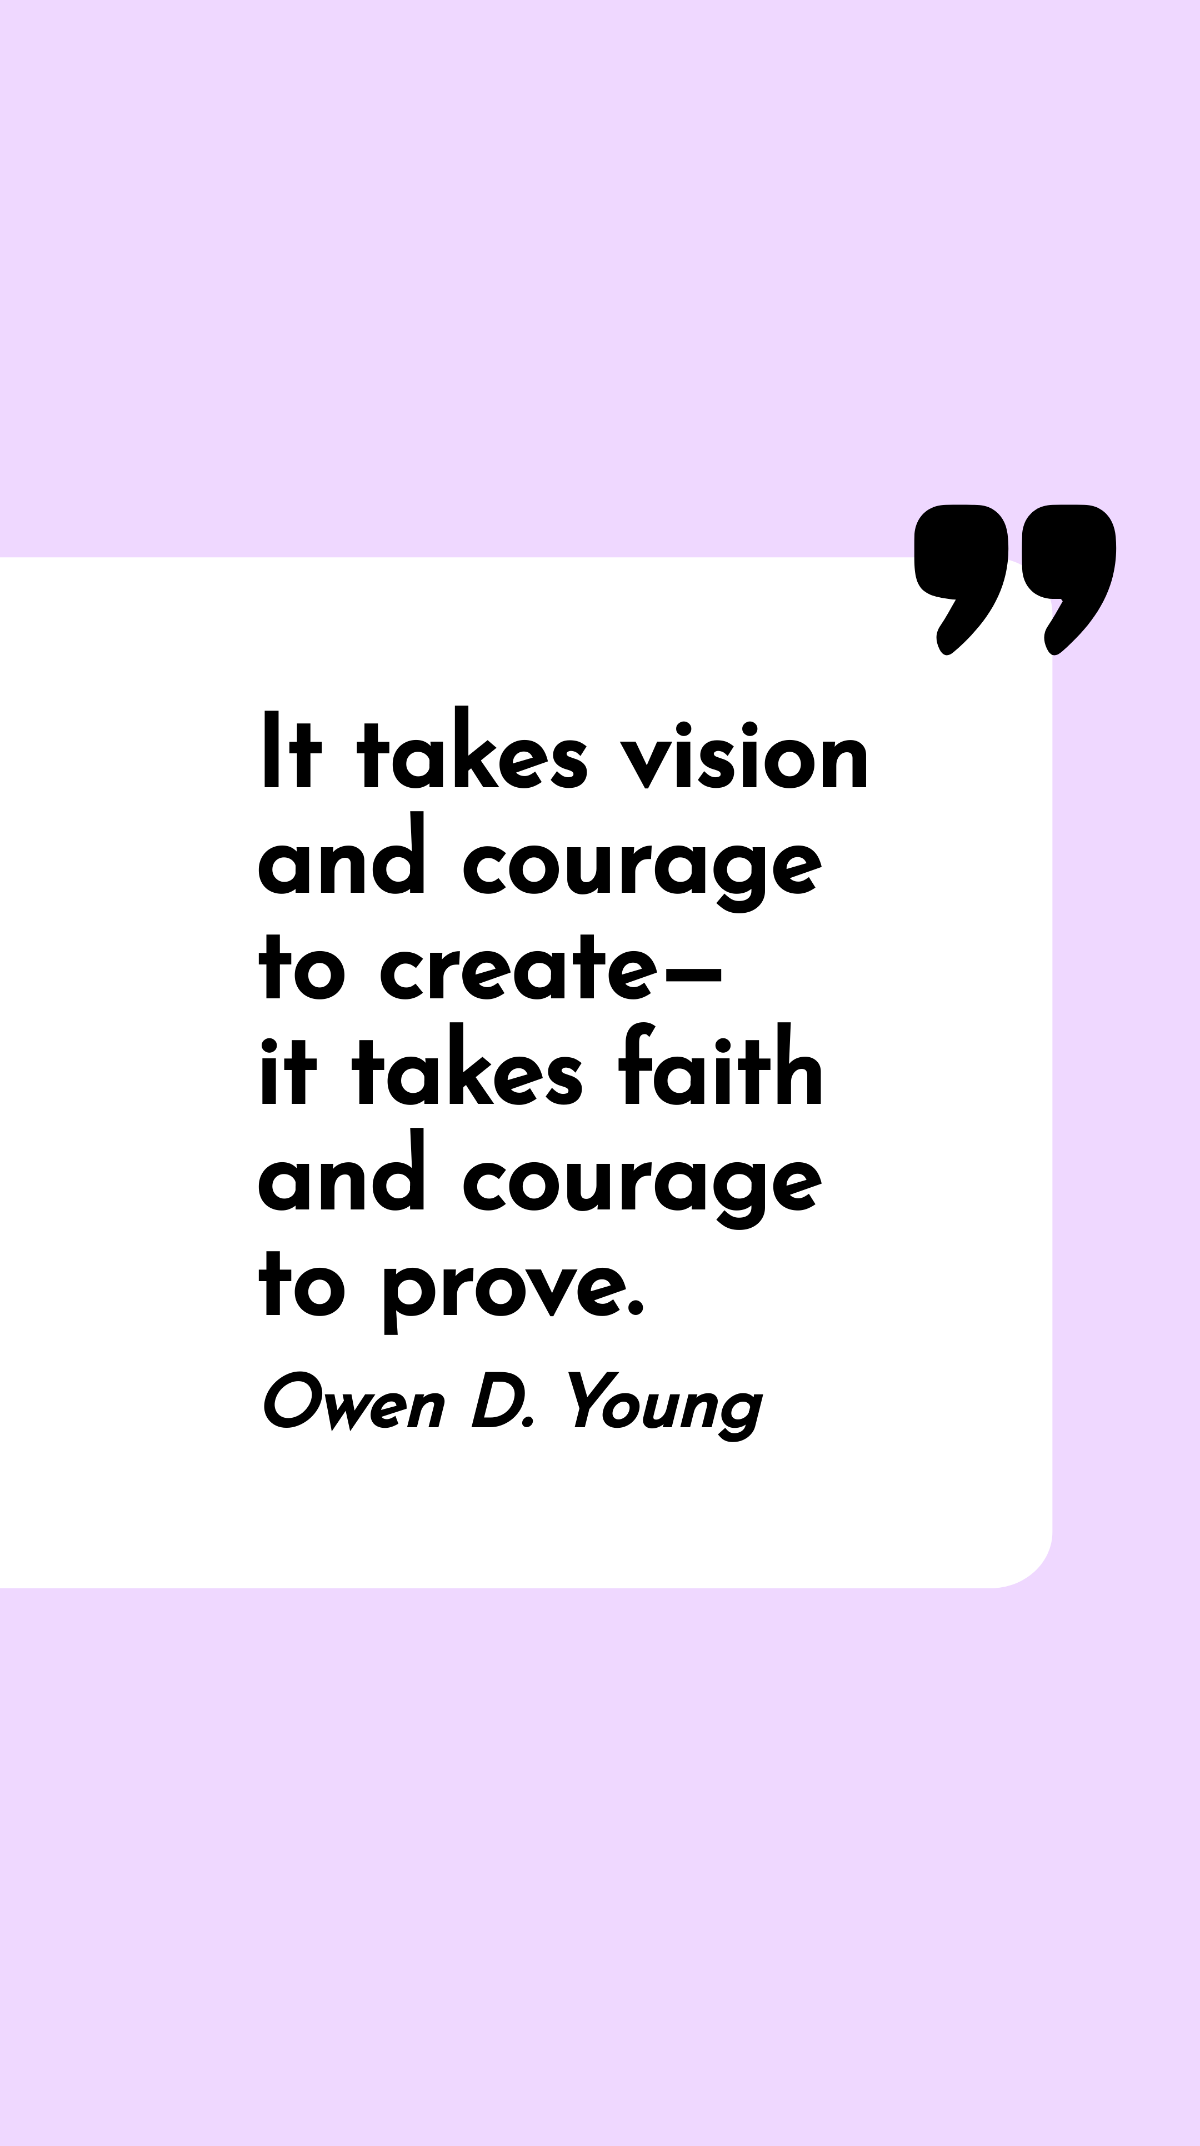 Free Owen D. Young - It takes vision and courage to create - it takes faith and courage to prove. Template